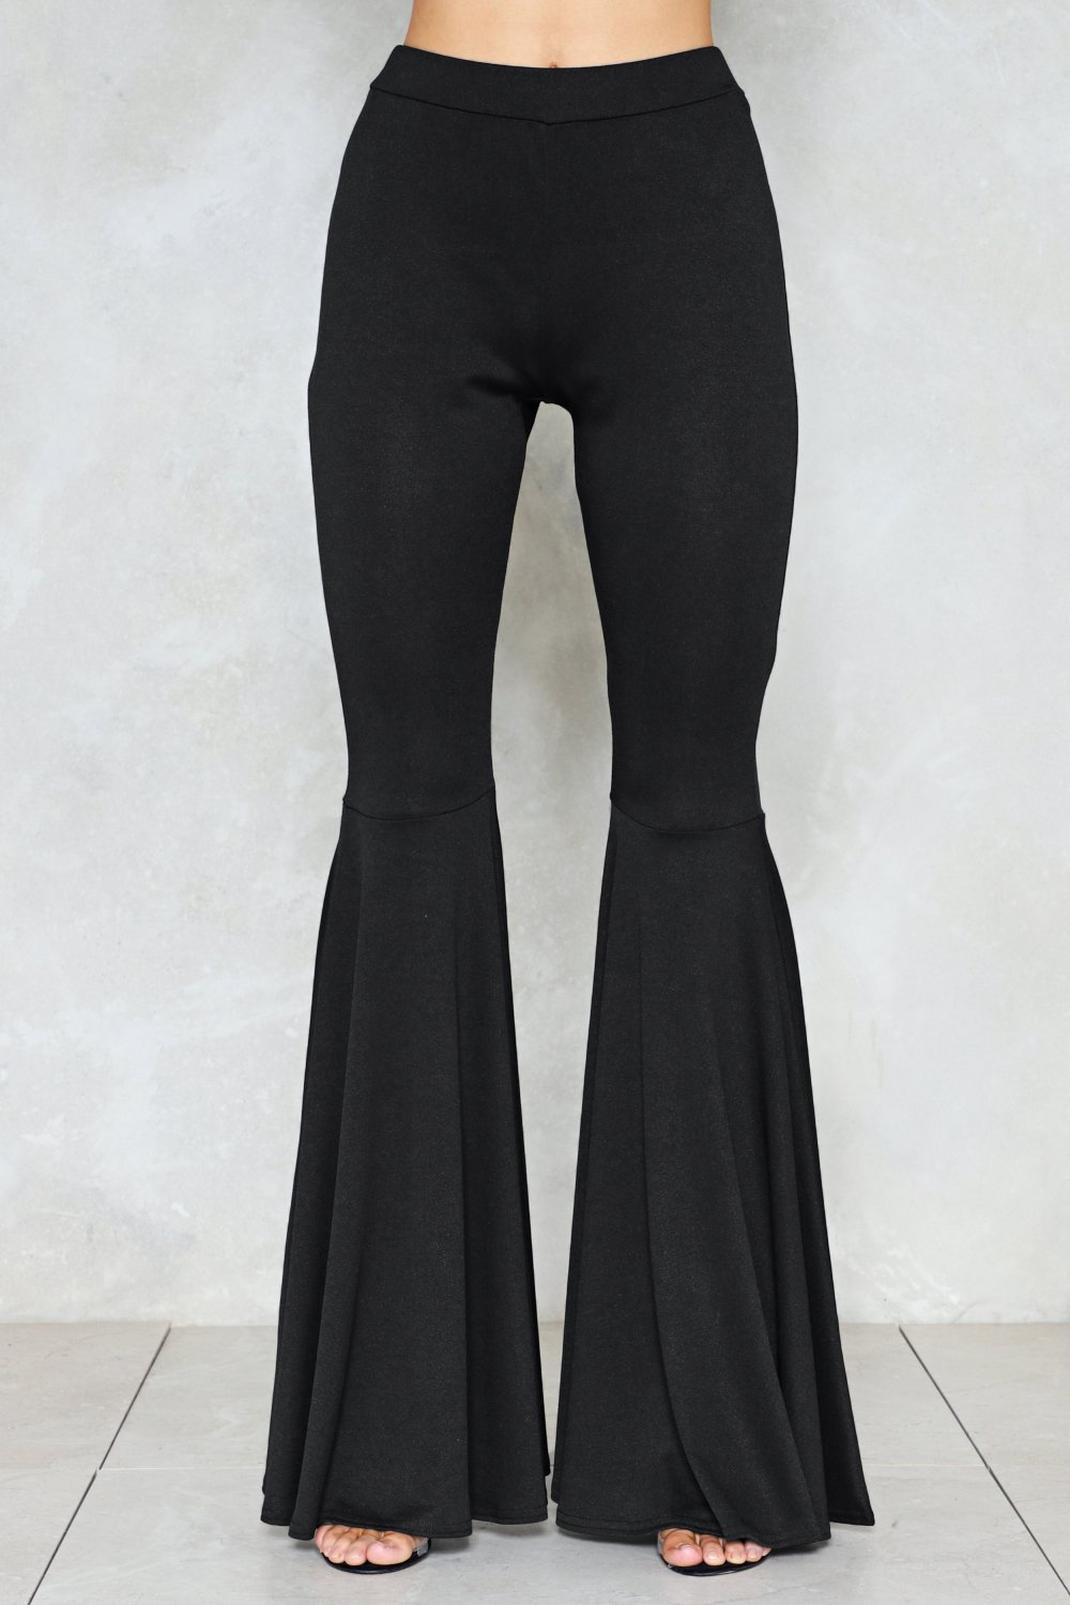 Taking Flare of Business High-Waisted Pants | Nasty Gal